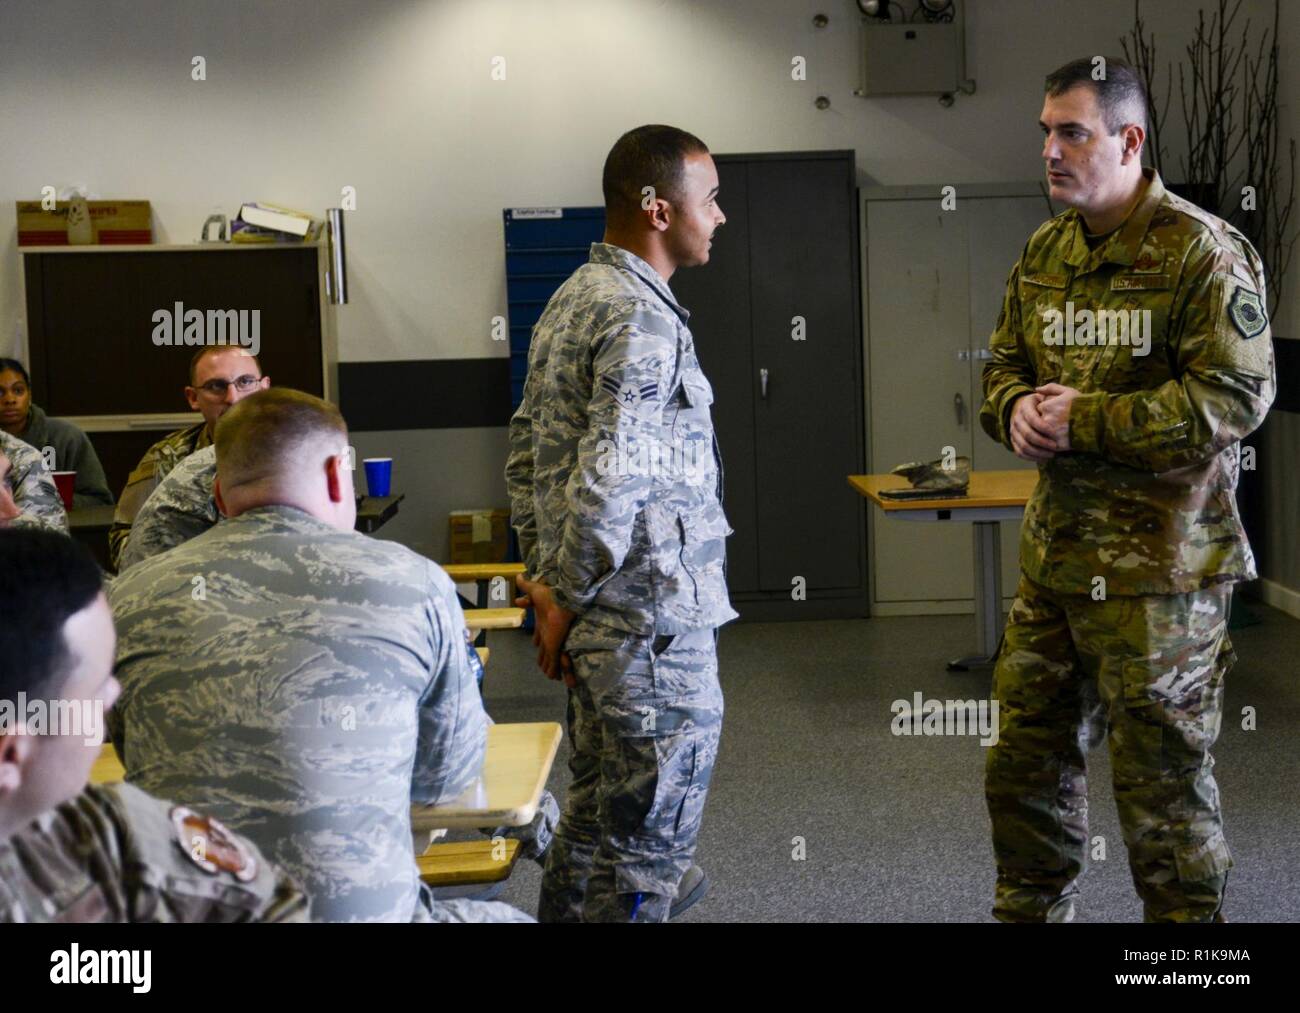 U.S. Air Force Brig. Gen. Mark R. August, 86th Airlift Wing commander, listens to a question from an Airman during an immersion tour of the 86th Maintenance Group on Ramstein Air Base, Germany, Oct. 9, 2018. August and Chief Master Sgt. Ernesto J. Rendon Jr., 86th AW command chief, used the immersion as a way to get a better understanding of the 86th MXG’s capabilities as well as a way for Airmen to ask questions directly to the wing leaders. Stock Photo